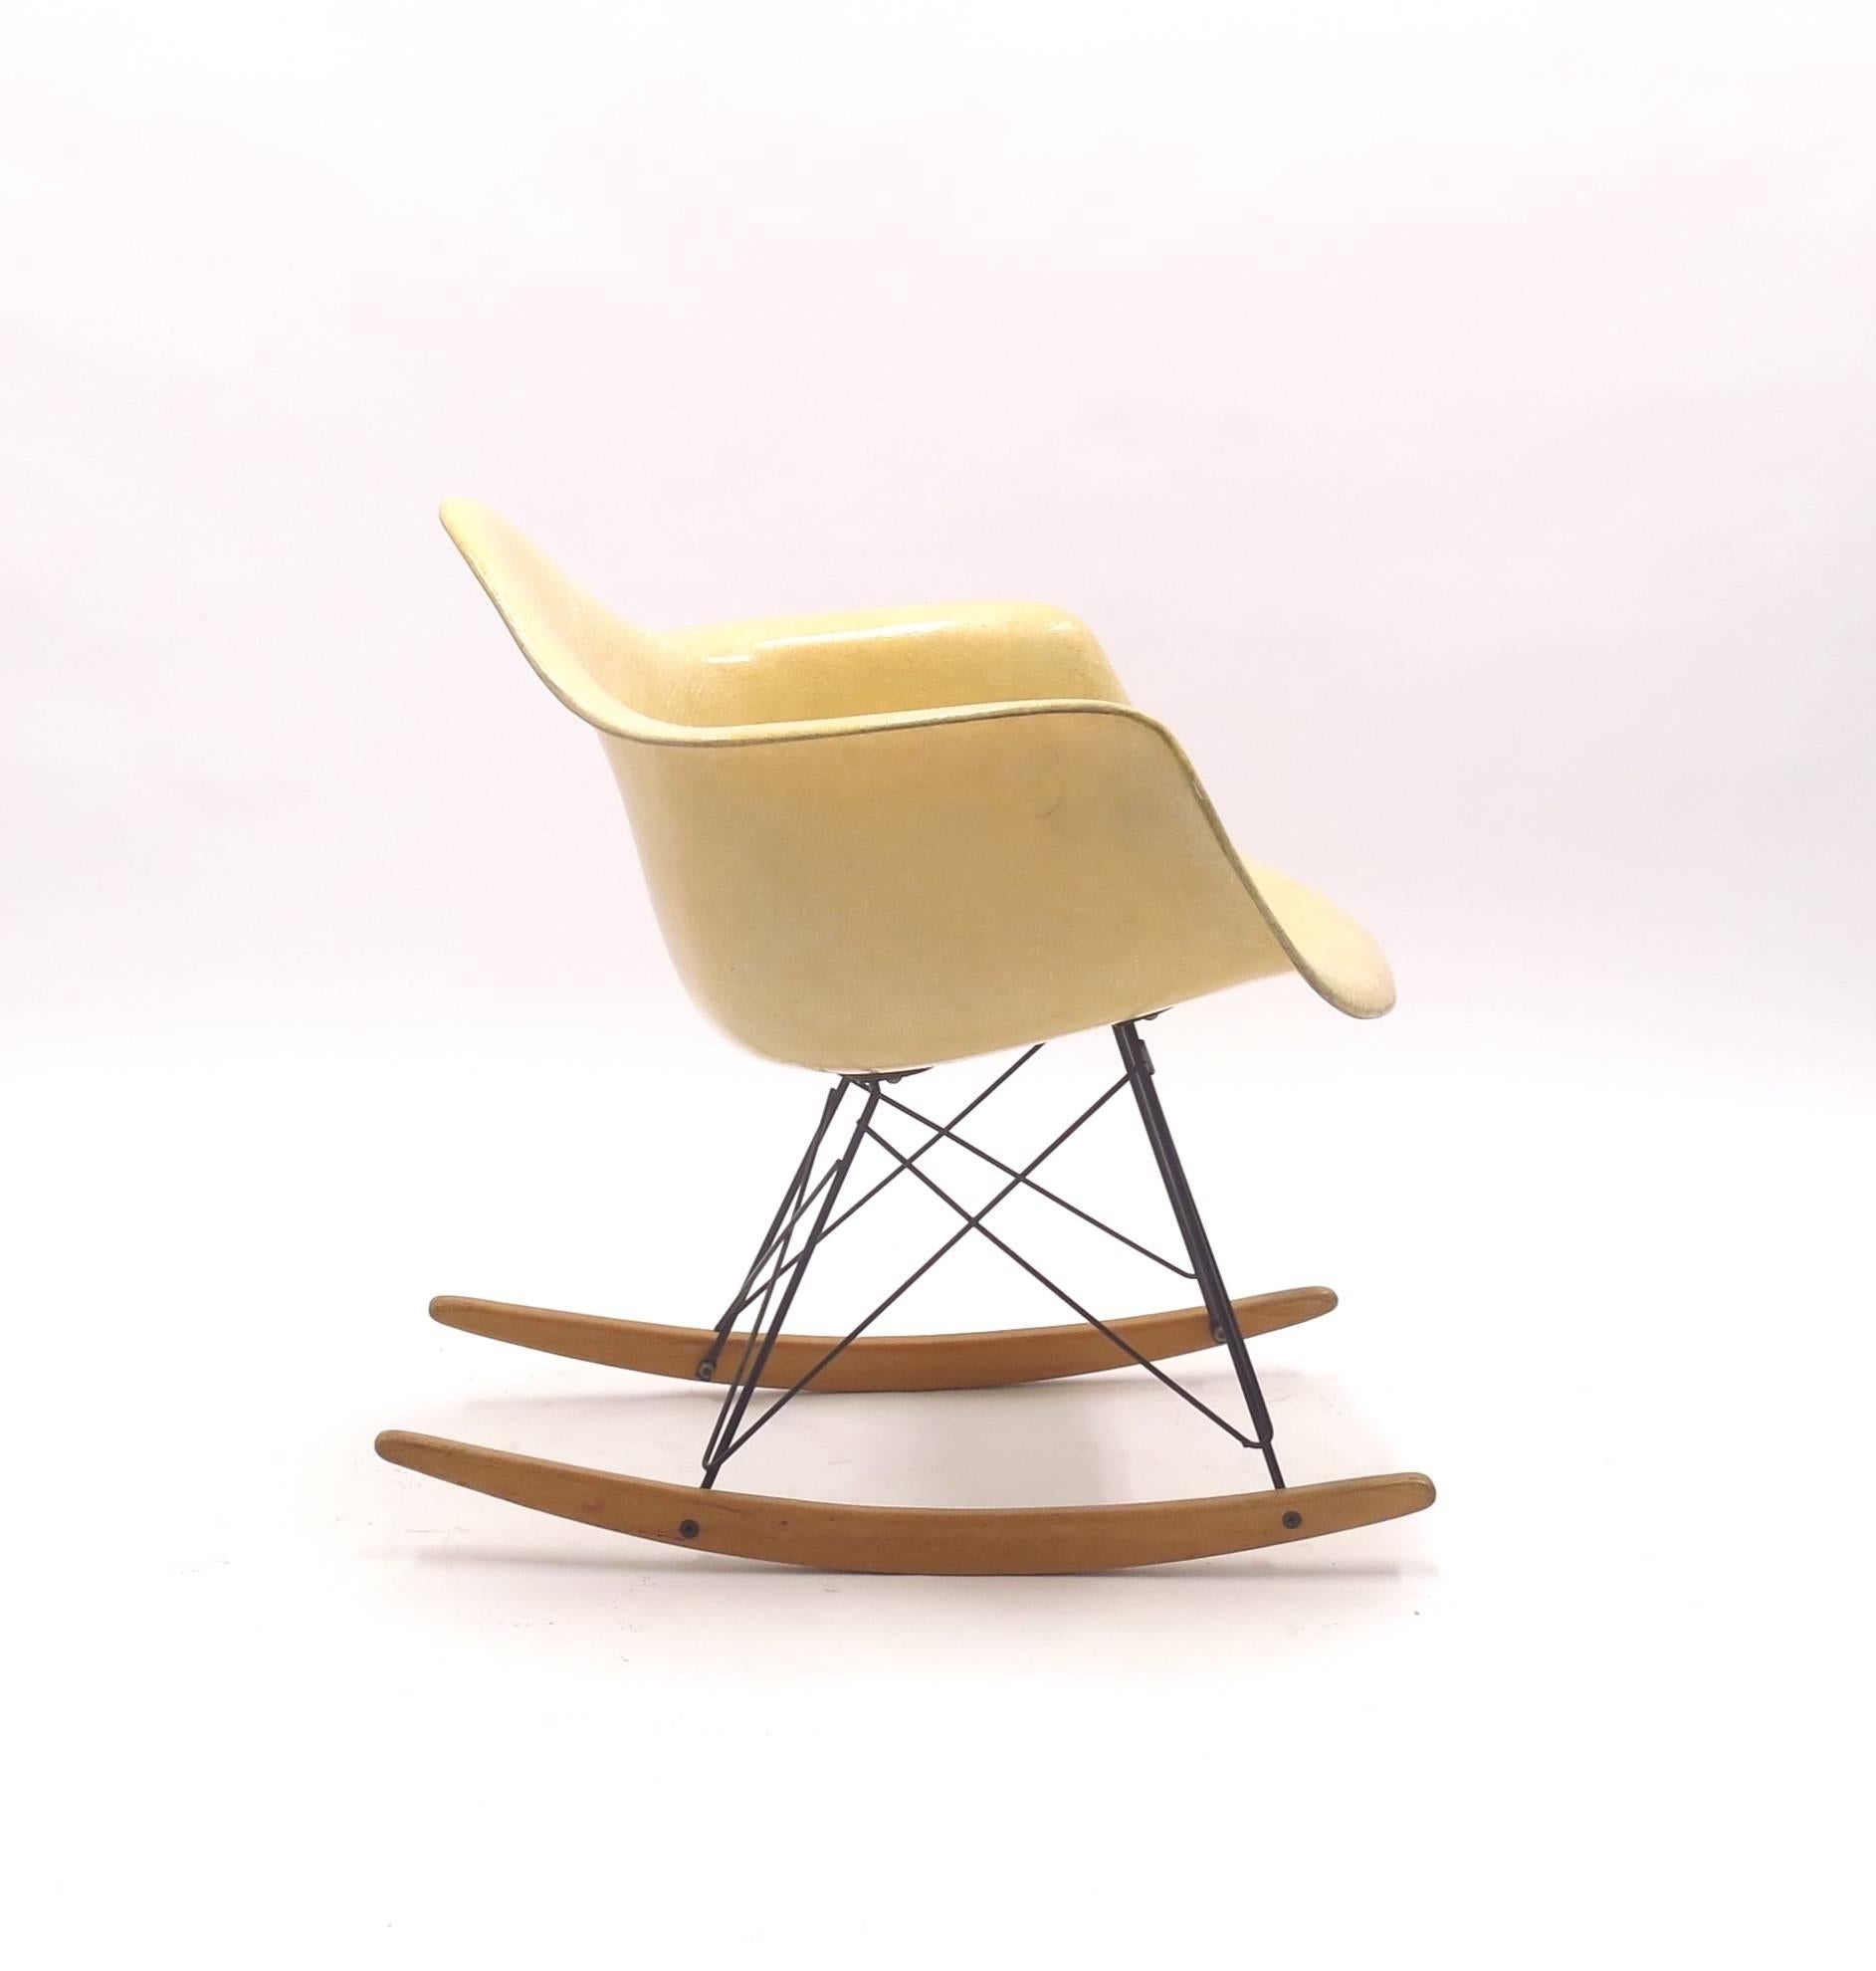 The RAR (Rocking Armchair on Rods) rocker was designed by Charles & Ray Eames for Herman Miller in the United States in the 1950s. This early edition was made by Zenith for Herman Miller and features rope edge and that thin almost see trough